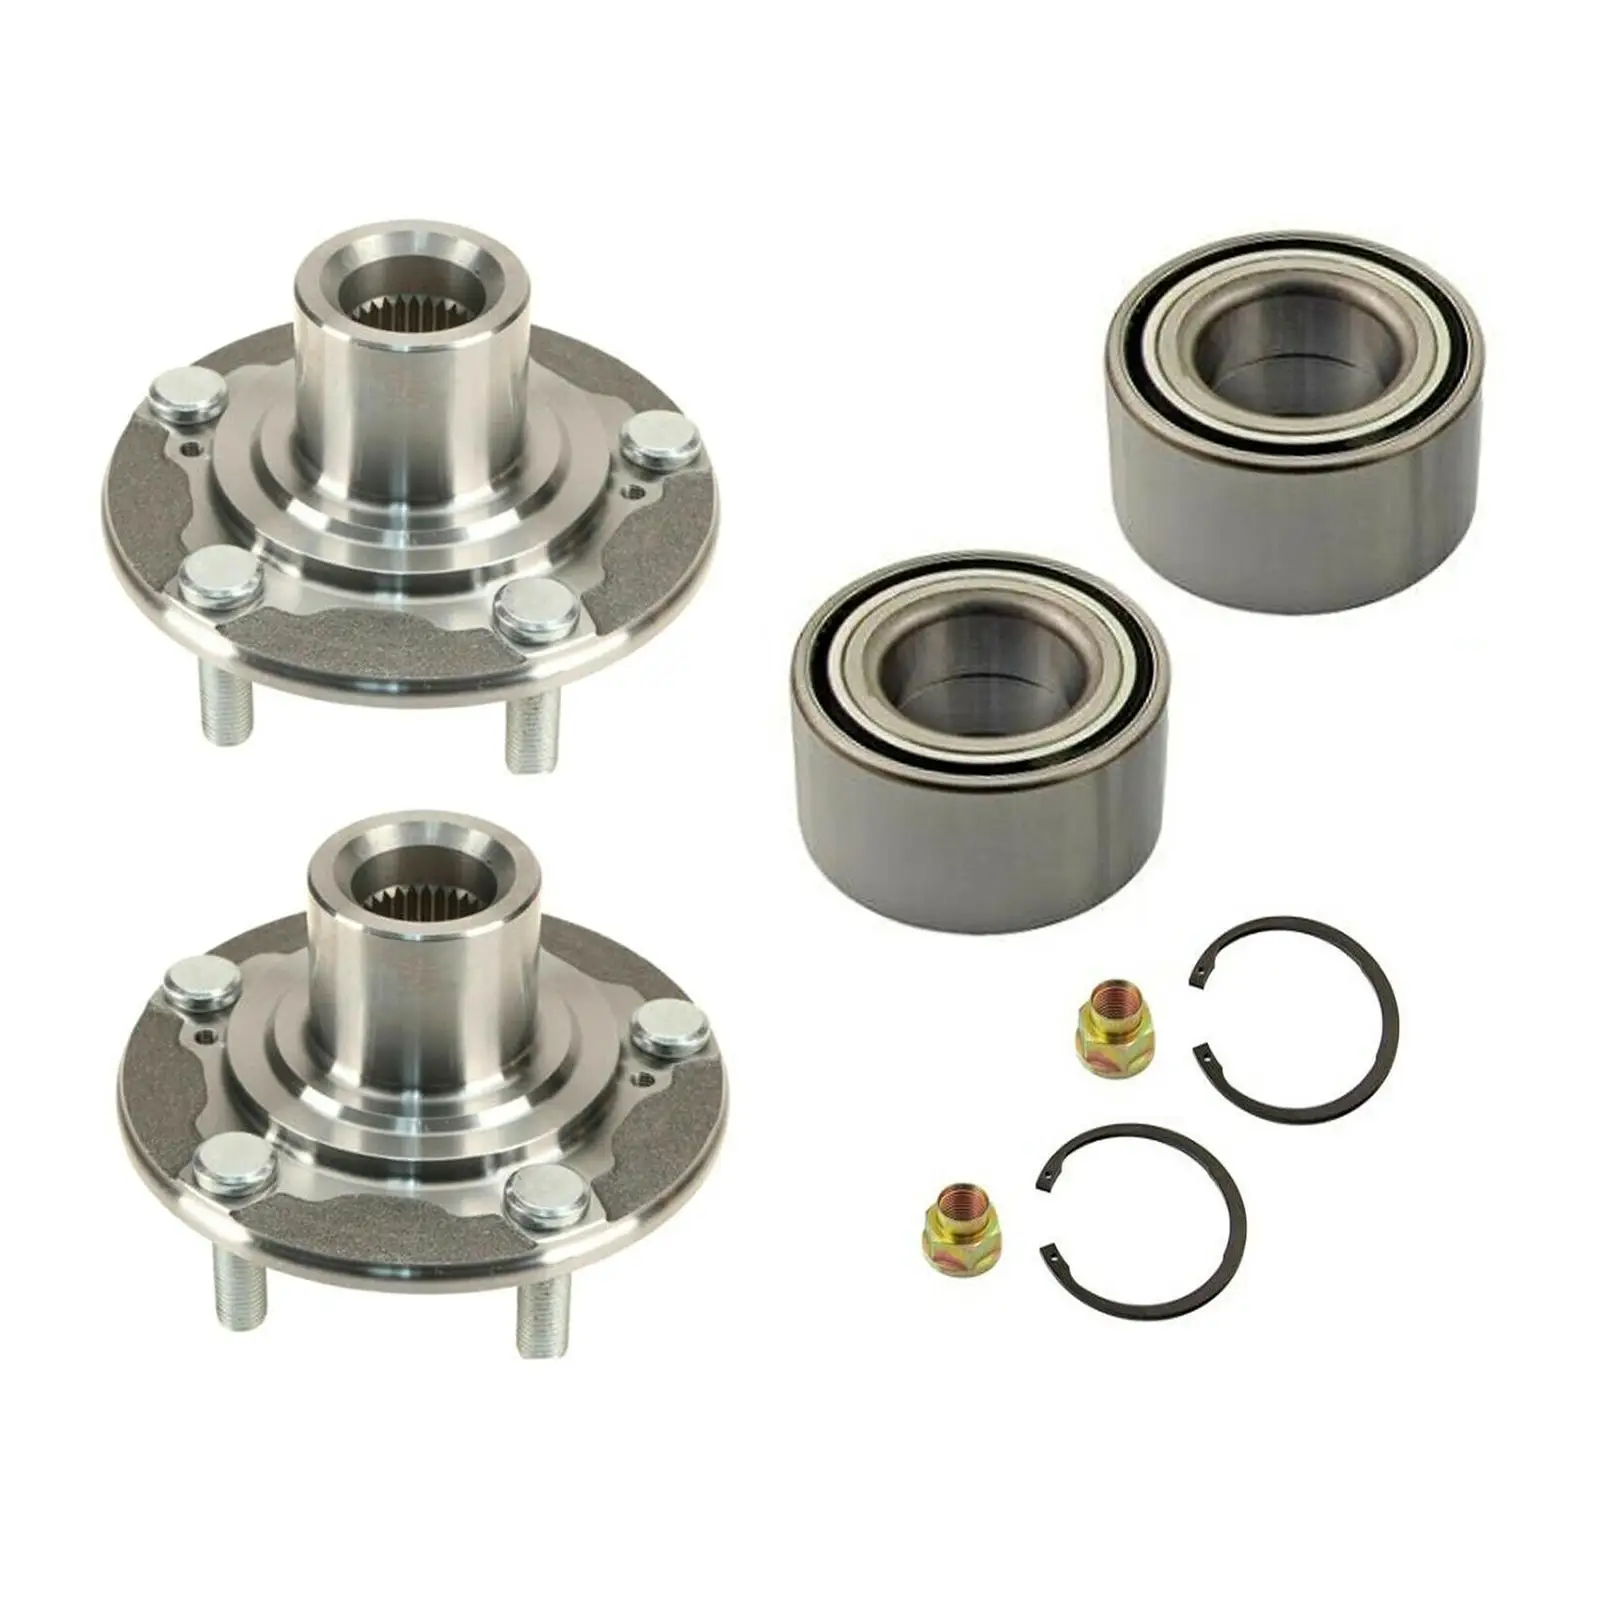 2x Front Wheel Hub and Bearing Repair Kits Replacement Spare Parts Professional Left and Right for Honda Accord 2013-2017